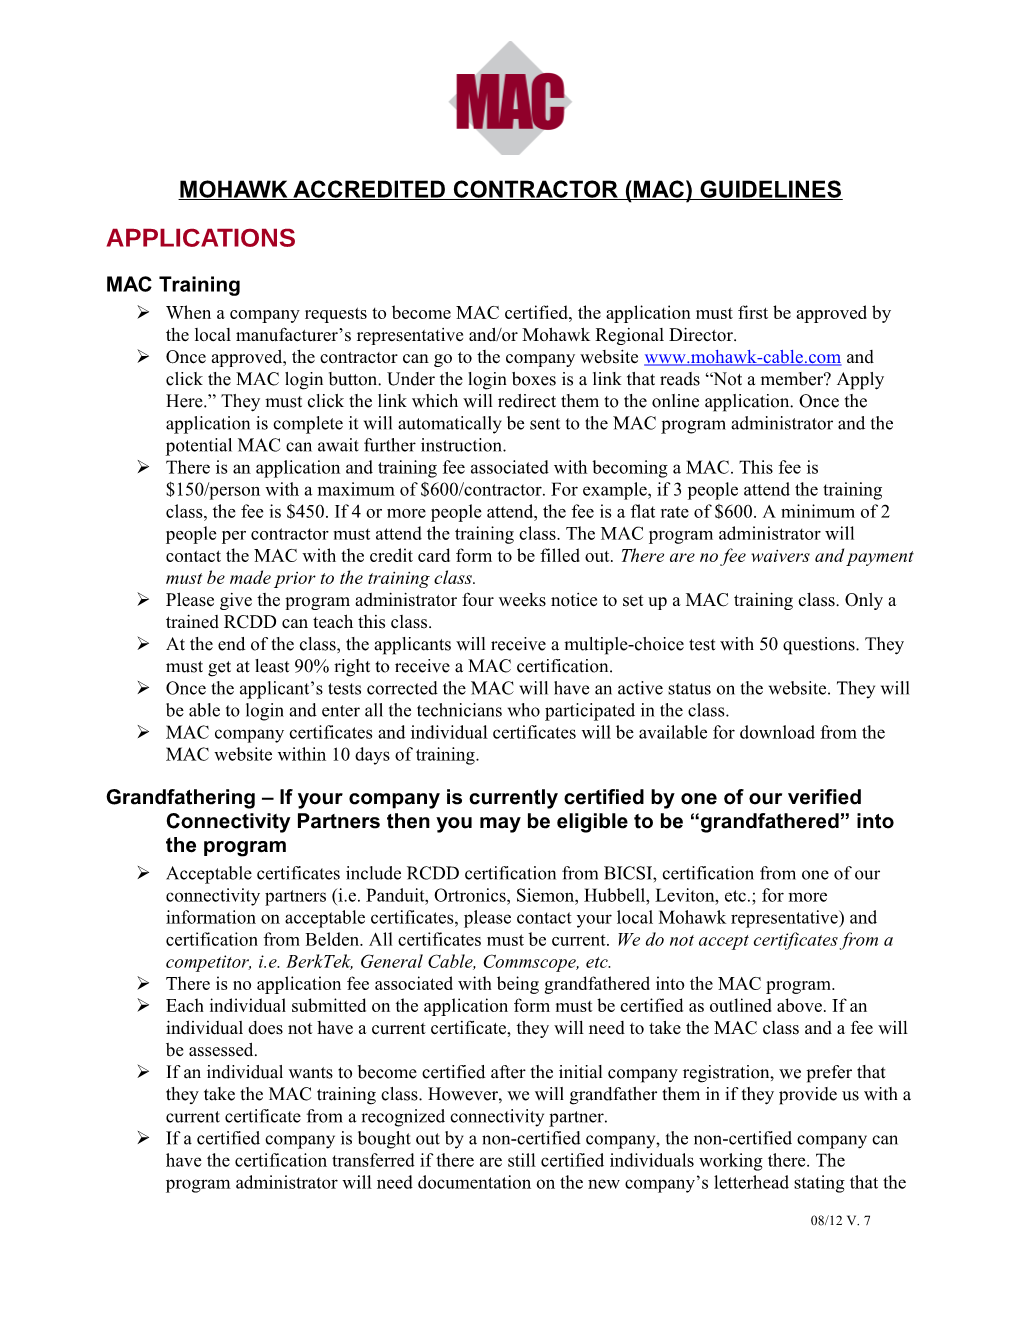 Mohawk Accredited Contractor (Mac) Guidelines